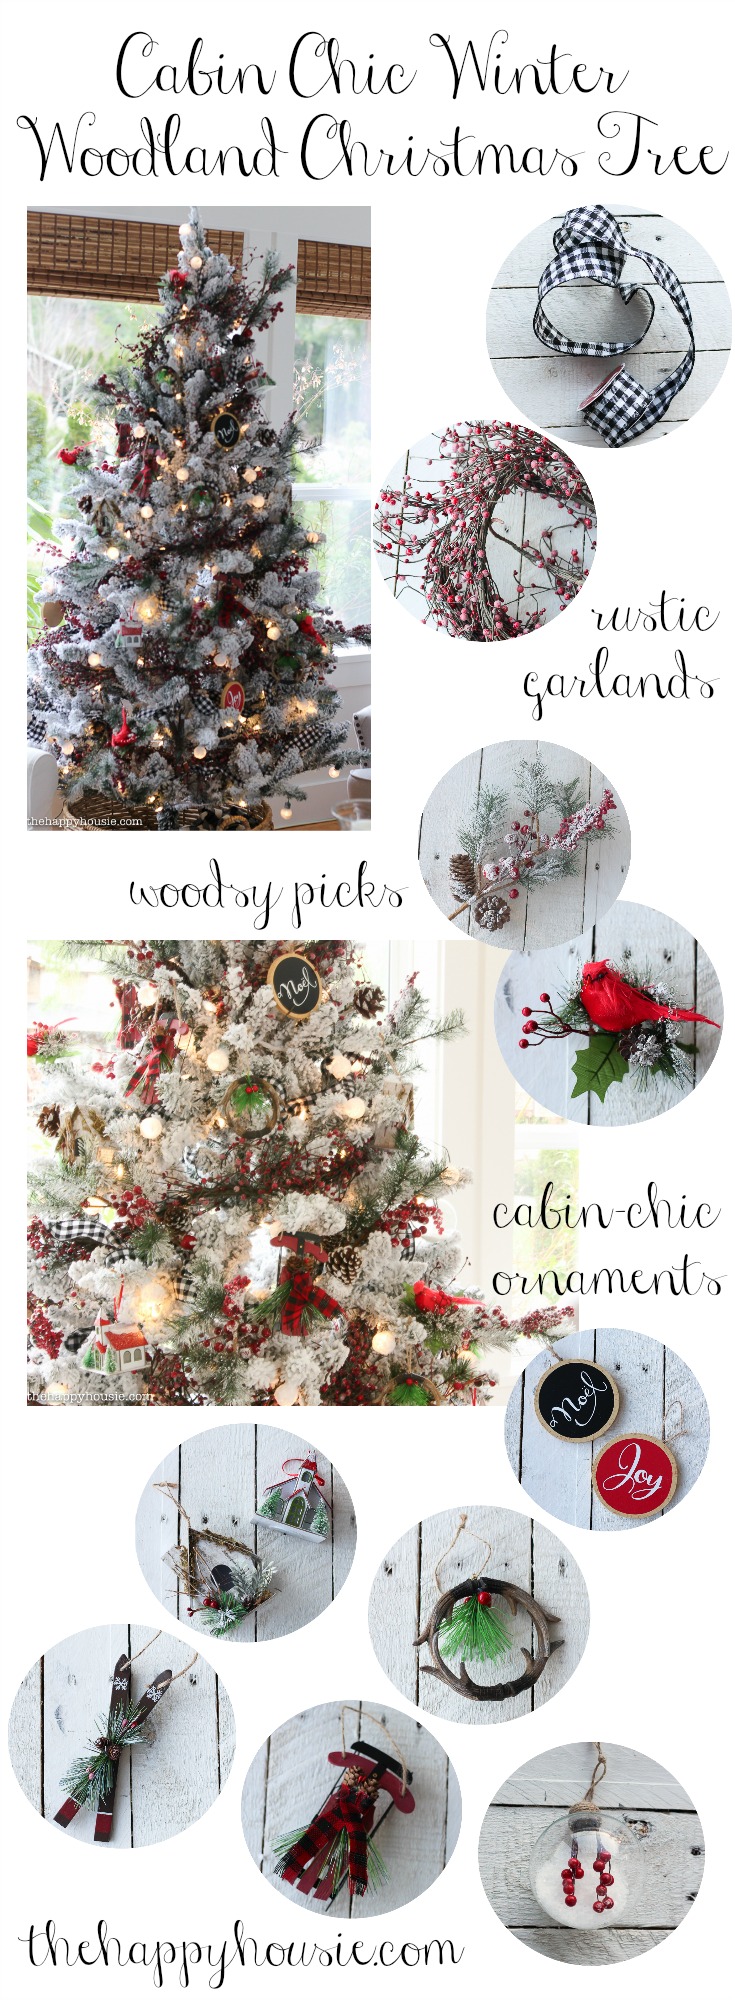 cabin-chic-winter-woodland-christmas-tree-for-my-home-style-my-christmas-tree-style-details-at-the-happy-housie